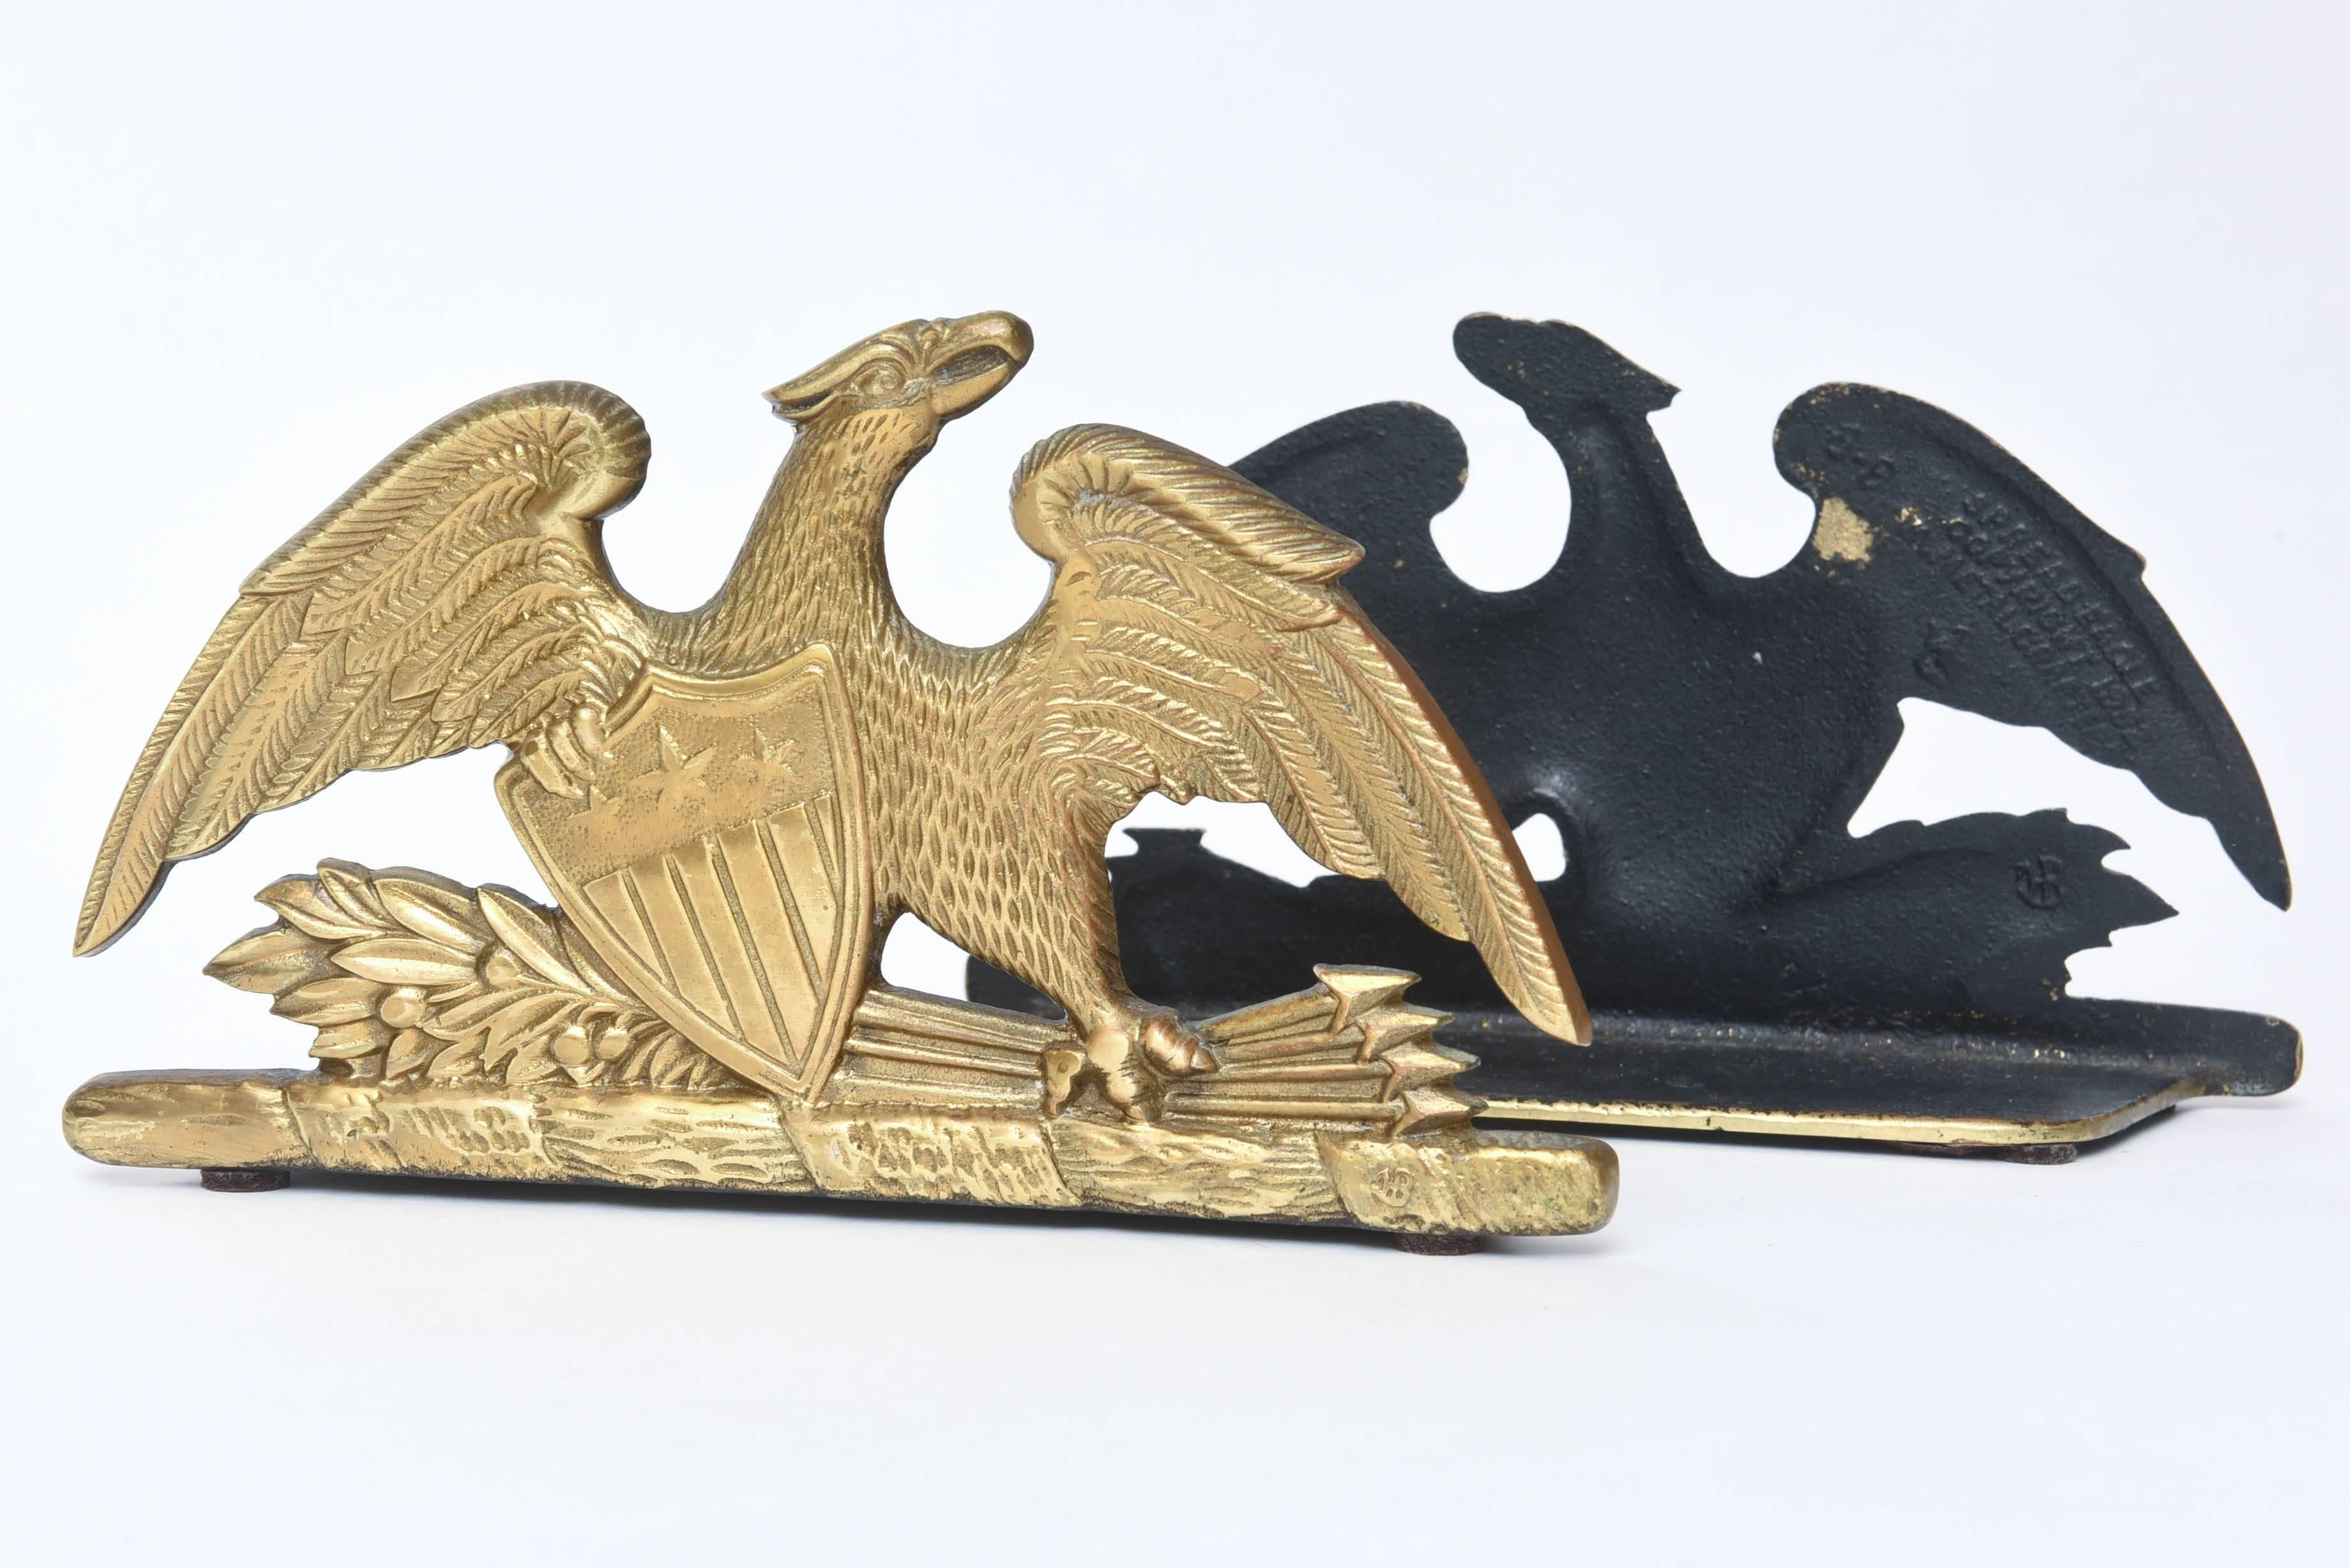 Pair of Eagle Bookends, Vintage Brass with Great Detail and Patina 1